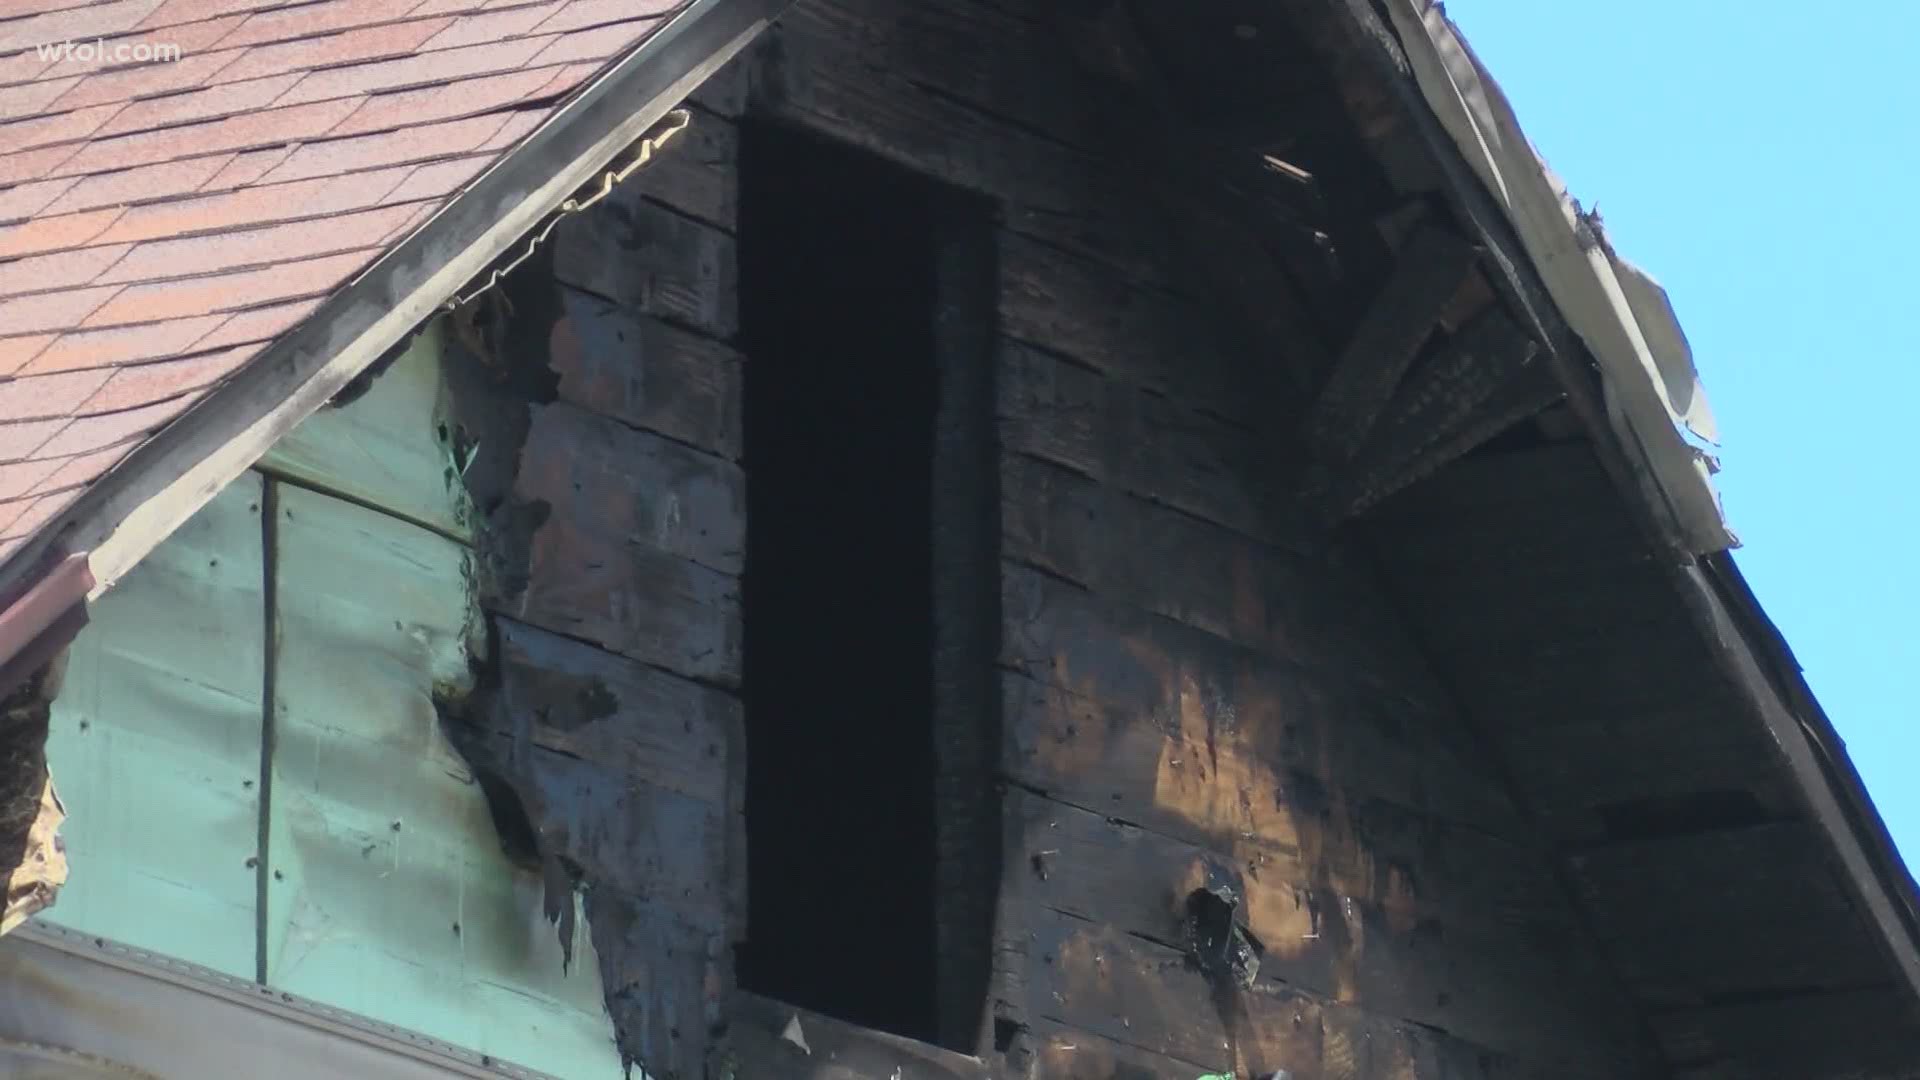 An elderly couple, who lost their E Perry street home to a fire, is receiving support through clothing donations and a GoFundme which has raised over $3500.